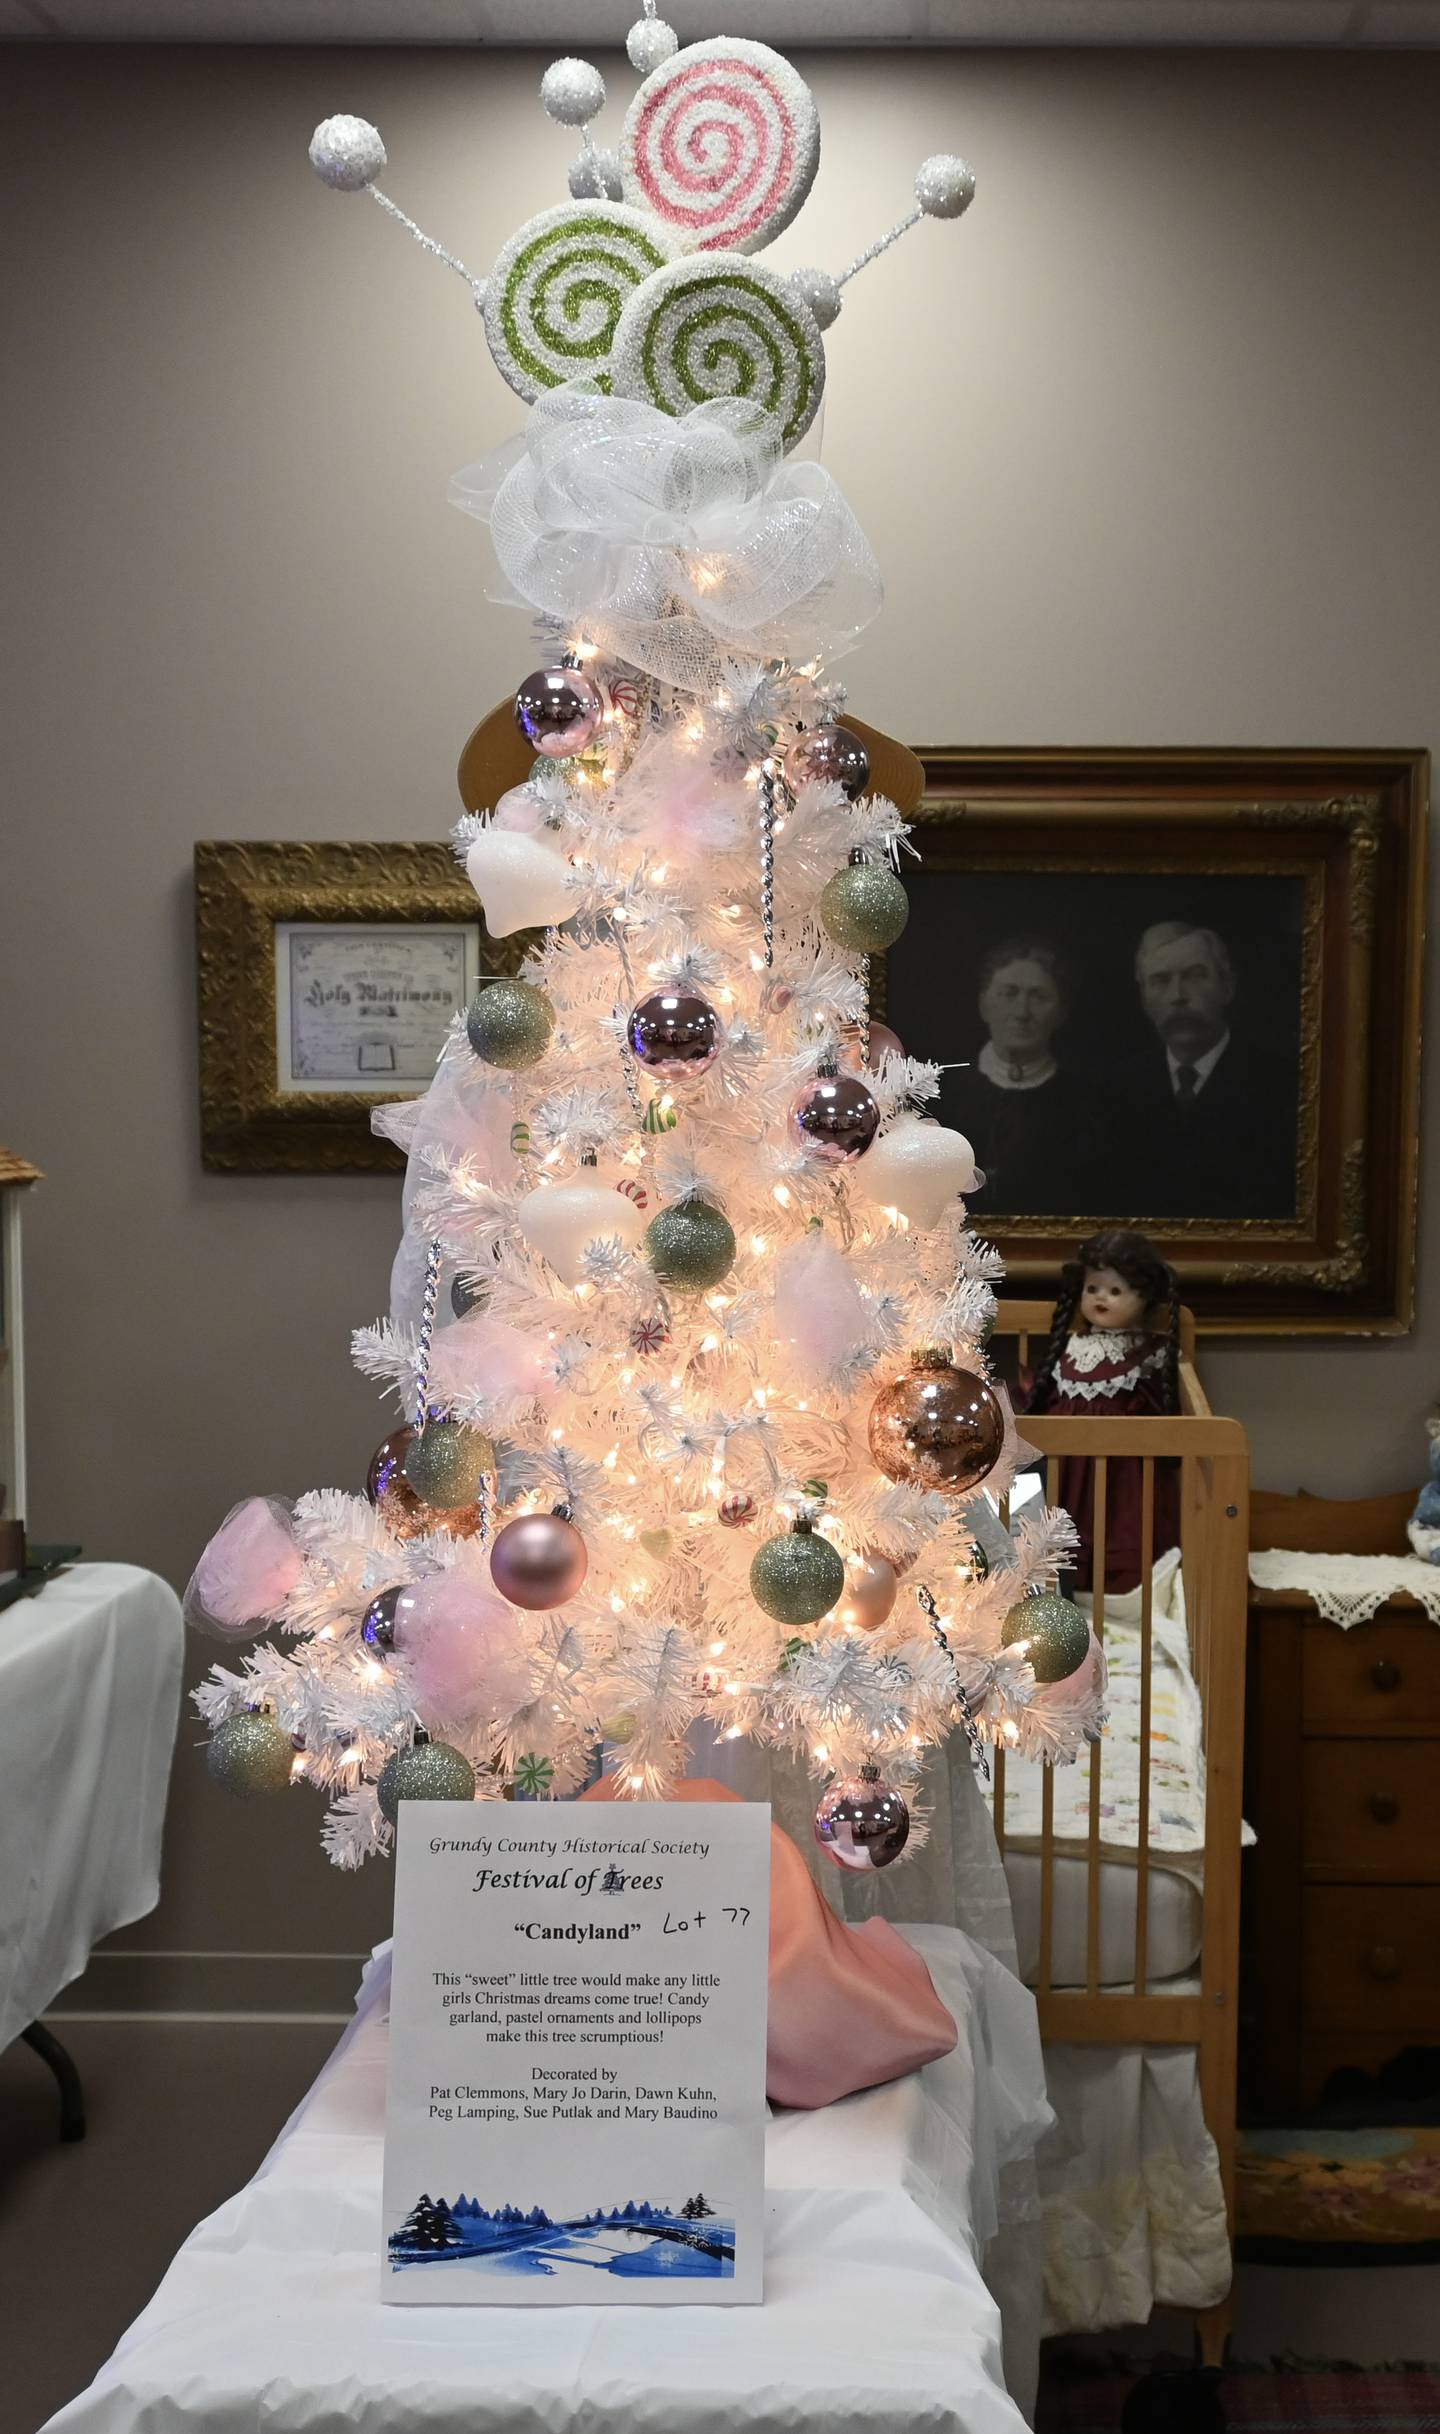 This 'Candyland' tree was decorated by: Pat Clemmons, Mary Jo Darin, Dawn Kuhn, Peg Lamping, Sue Putlak, & Mary Baudinoto